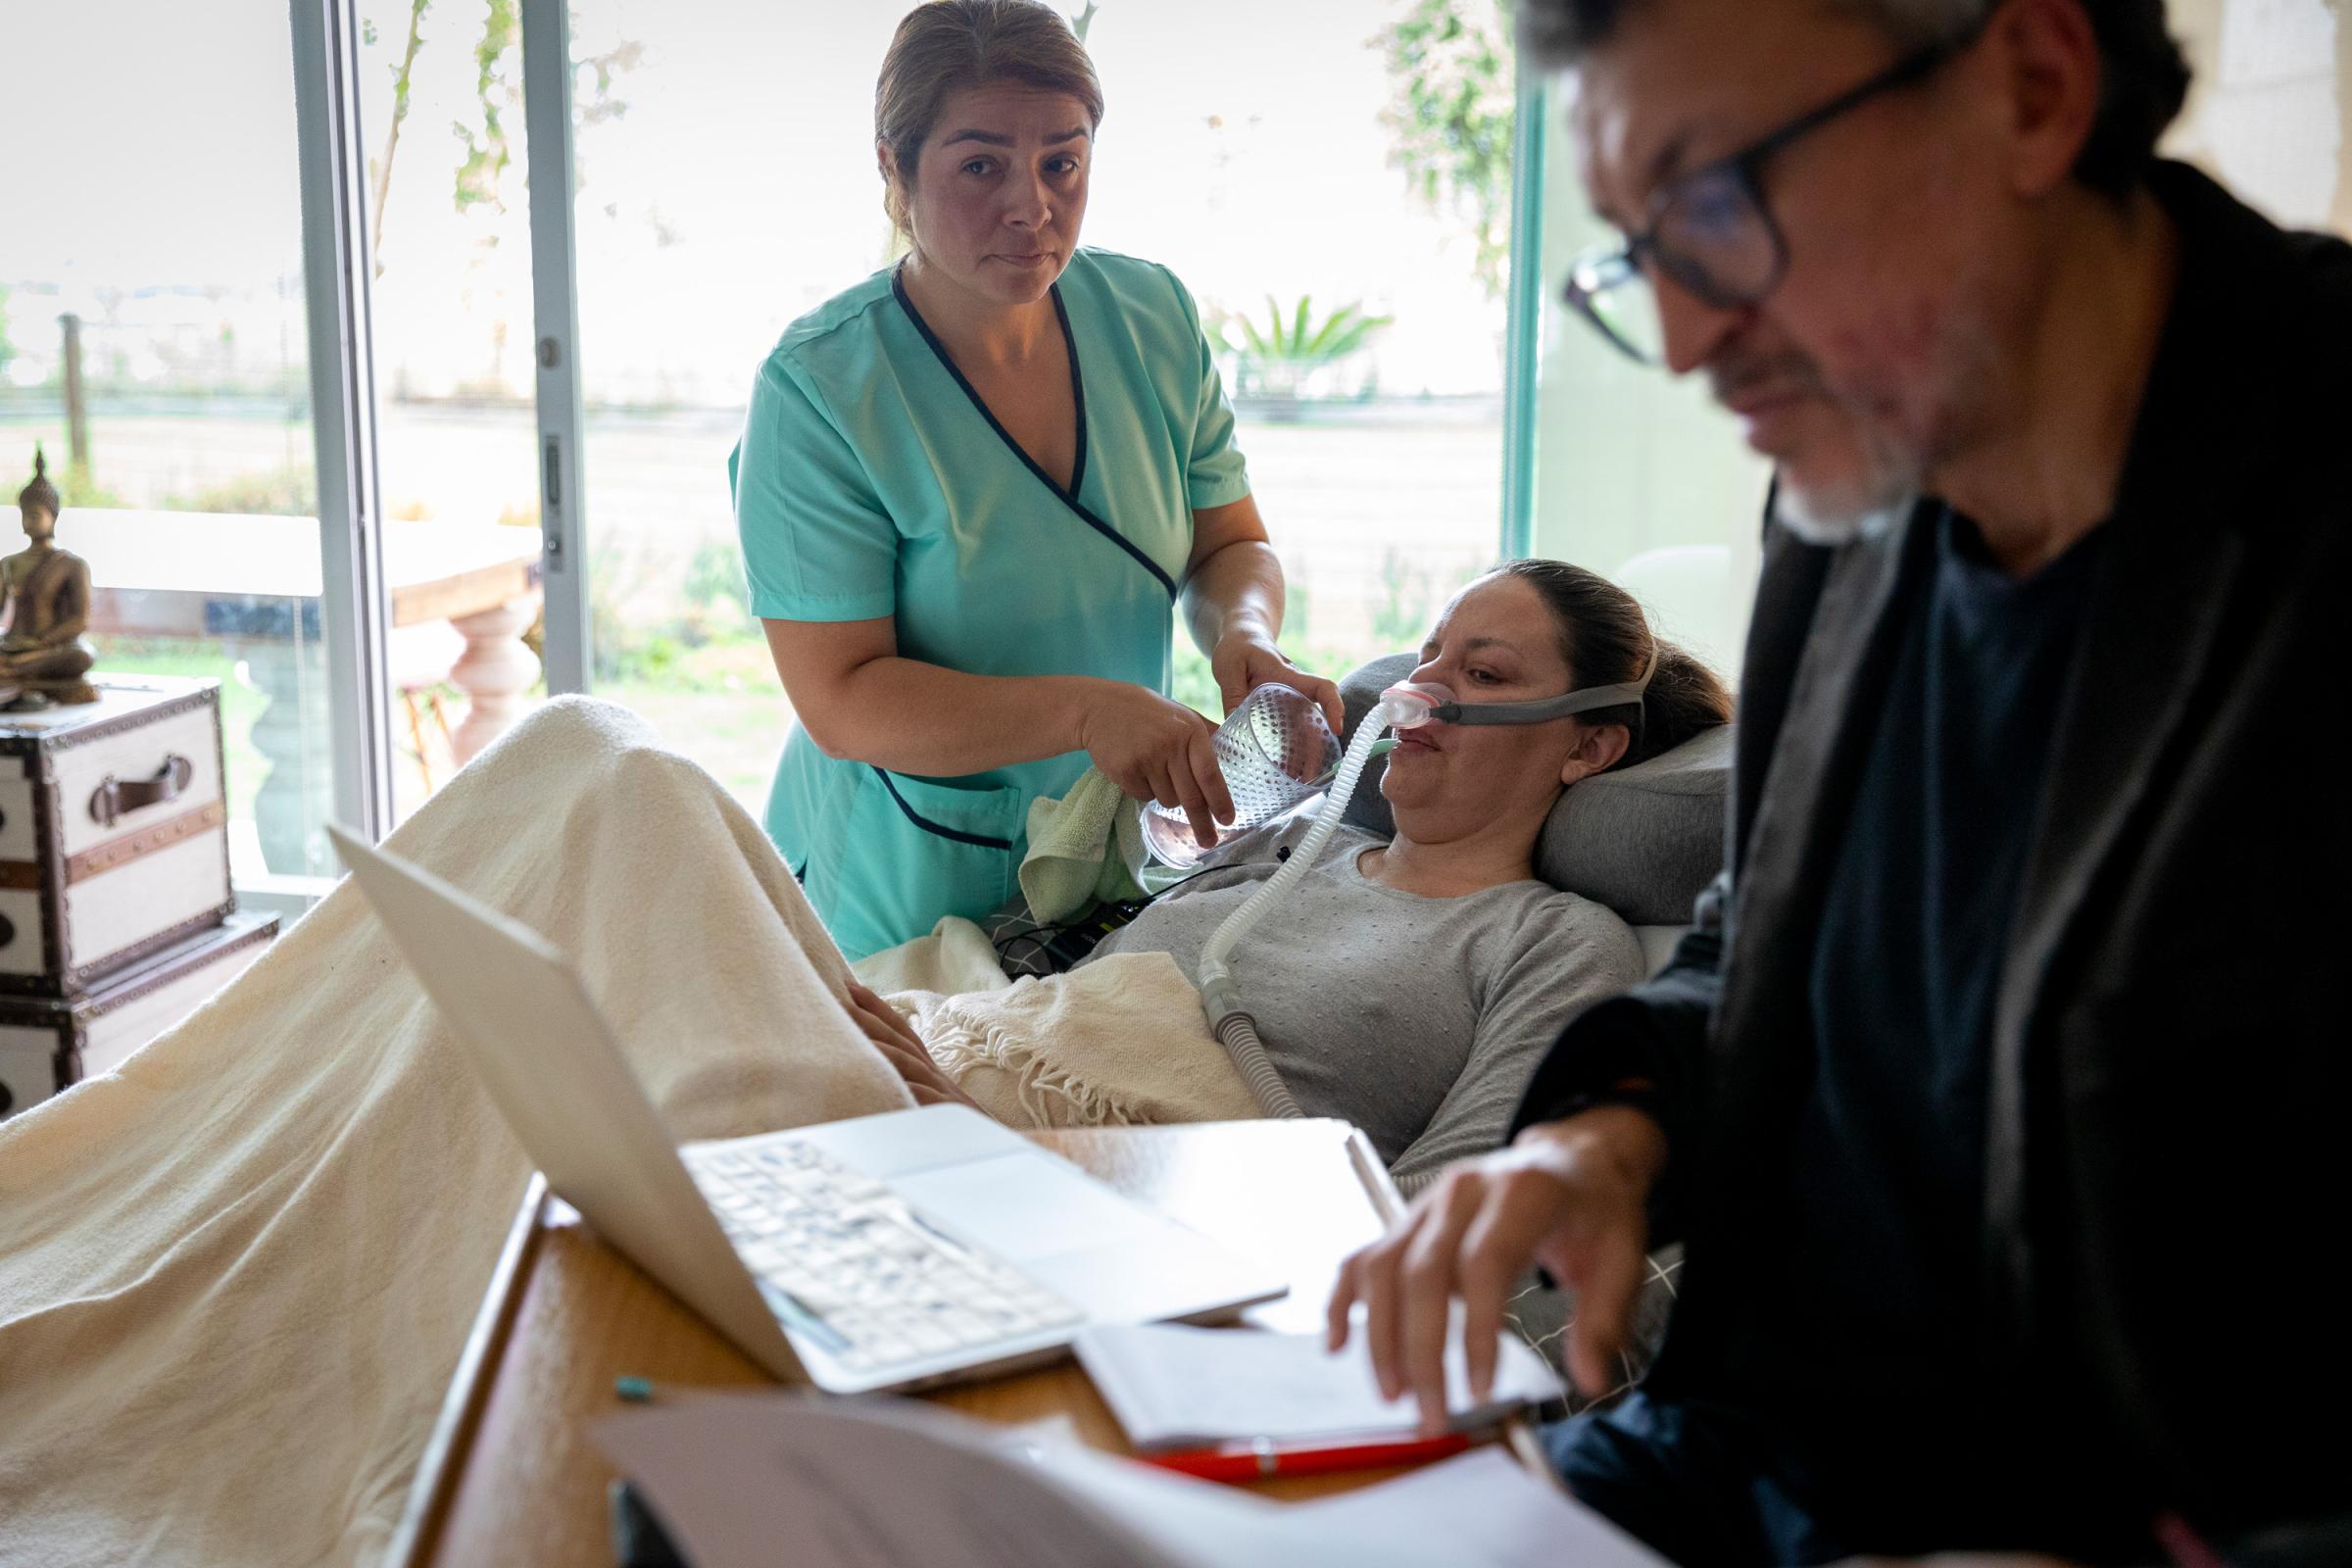 Ecuador legalizes euthanasia thanks to Paola Roldan's fight - A nurse attends to Paola Roldán during the public...